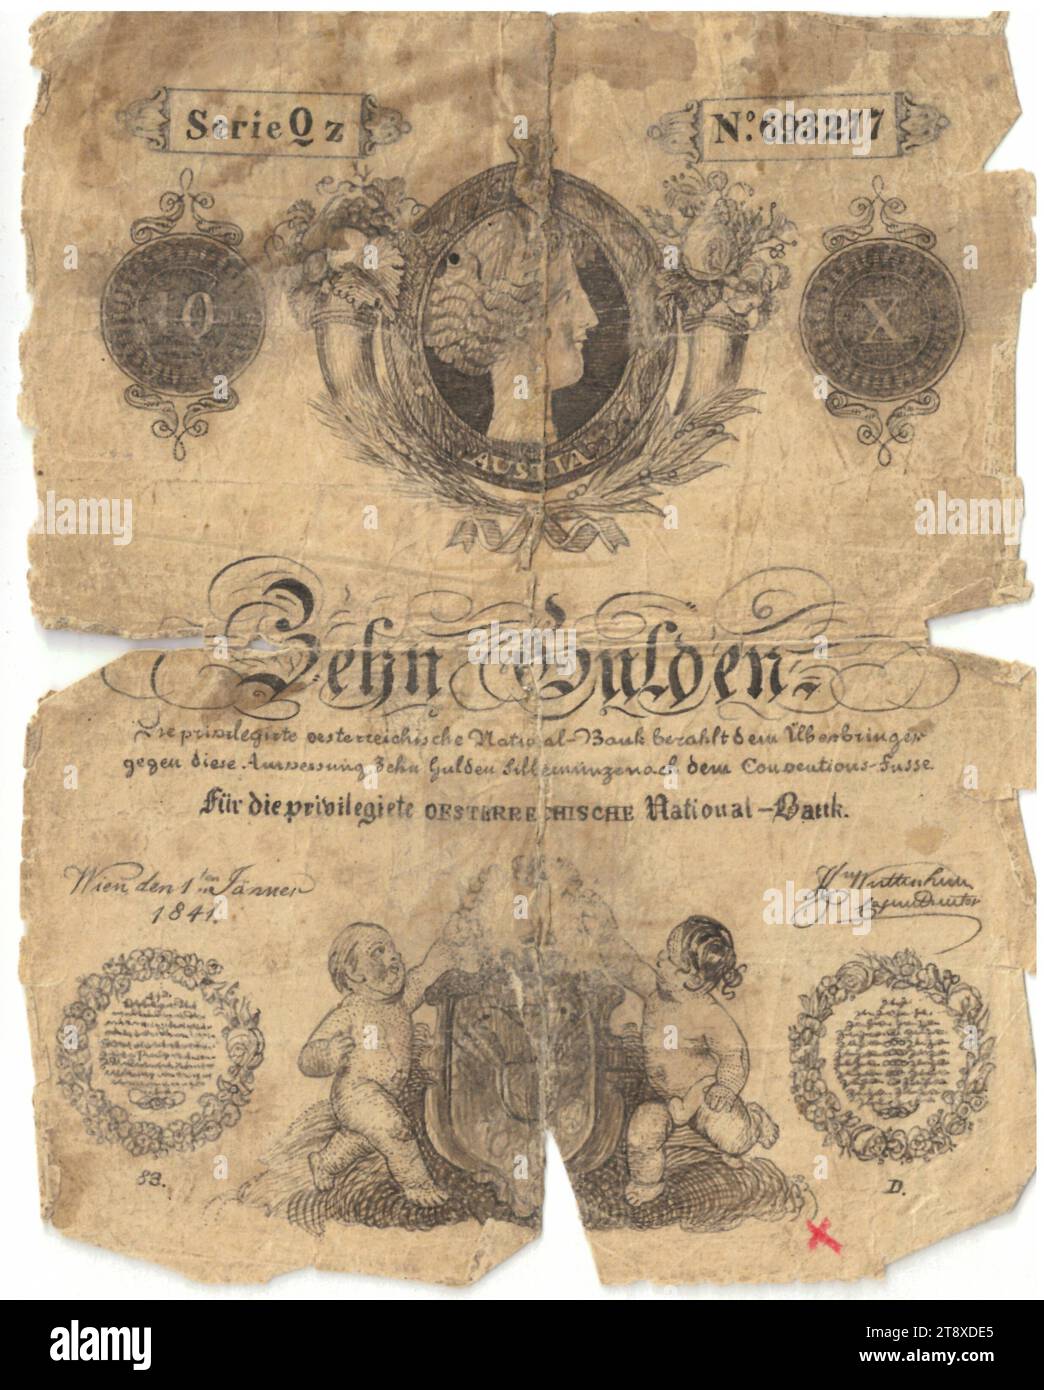 Instruction (forgery), 10 florins, Privilegierte Österreichische National-Bank, mint authority, Date after 01.01.1841, paper, printing, height 128 mm, width 103 mm, Mint, Vienna, Mint territory, Austria, Empire (1804-1867), Finance, counterfeit, forgery, woman, child, coat of arms (as symbol of the state, etc.), bank-note, money, The Vienna Collection Stock Photo